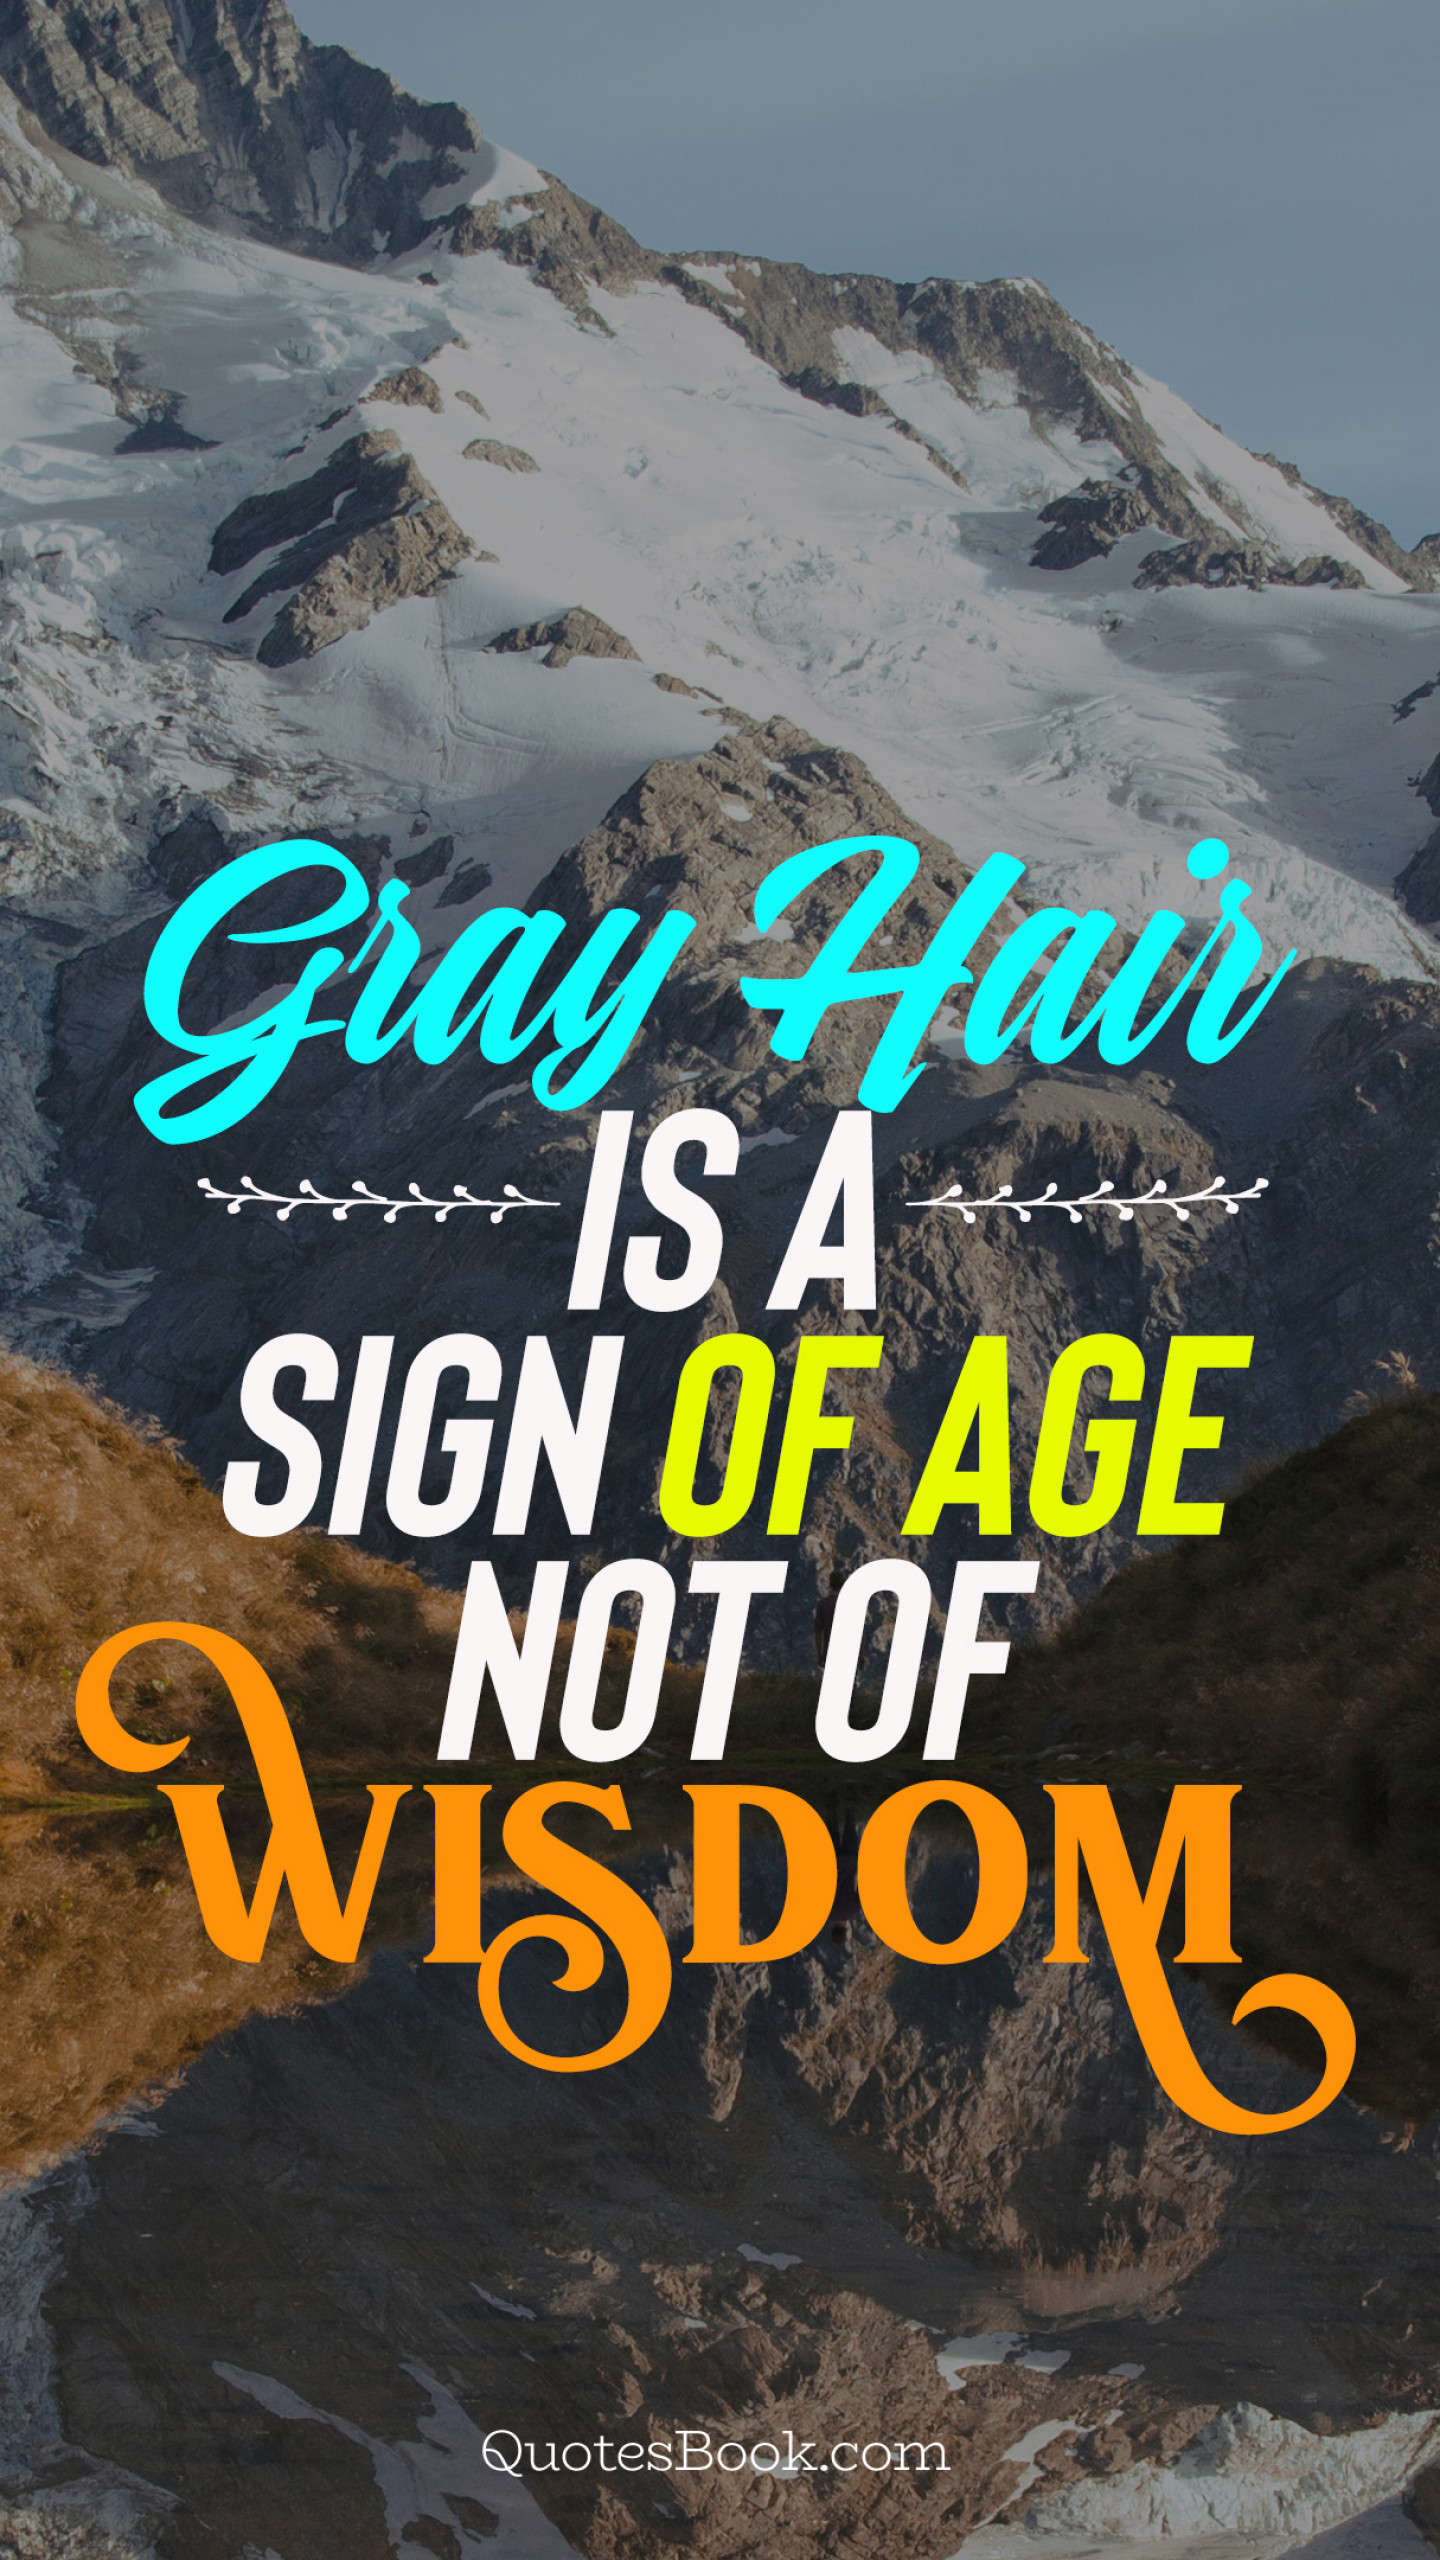 Gray hair is a sign of age not of wisdom - QuotesBook